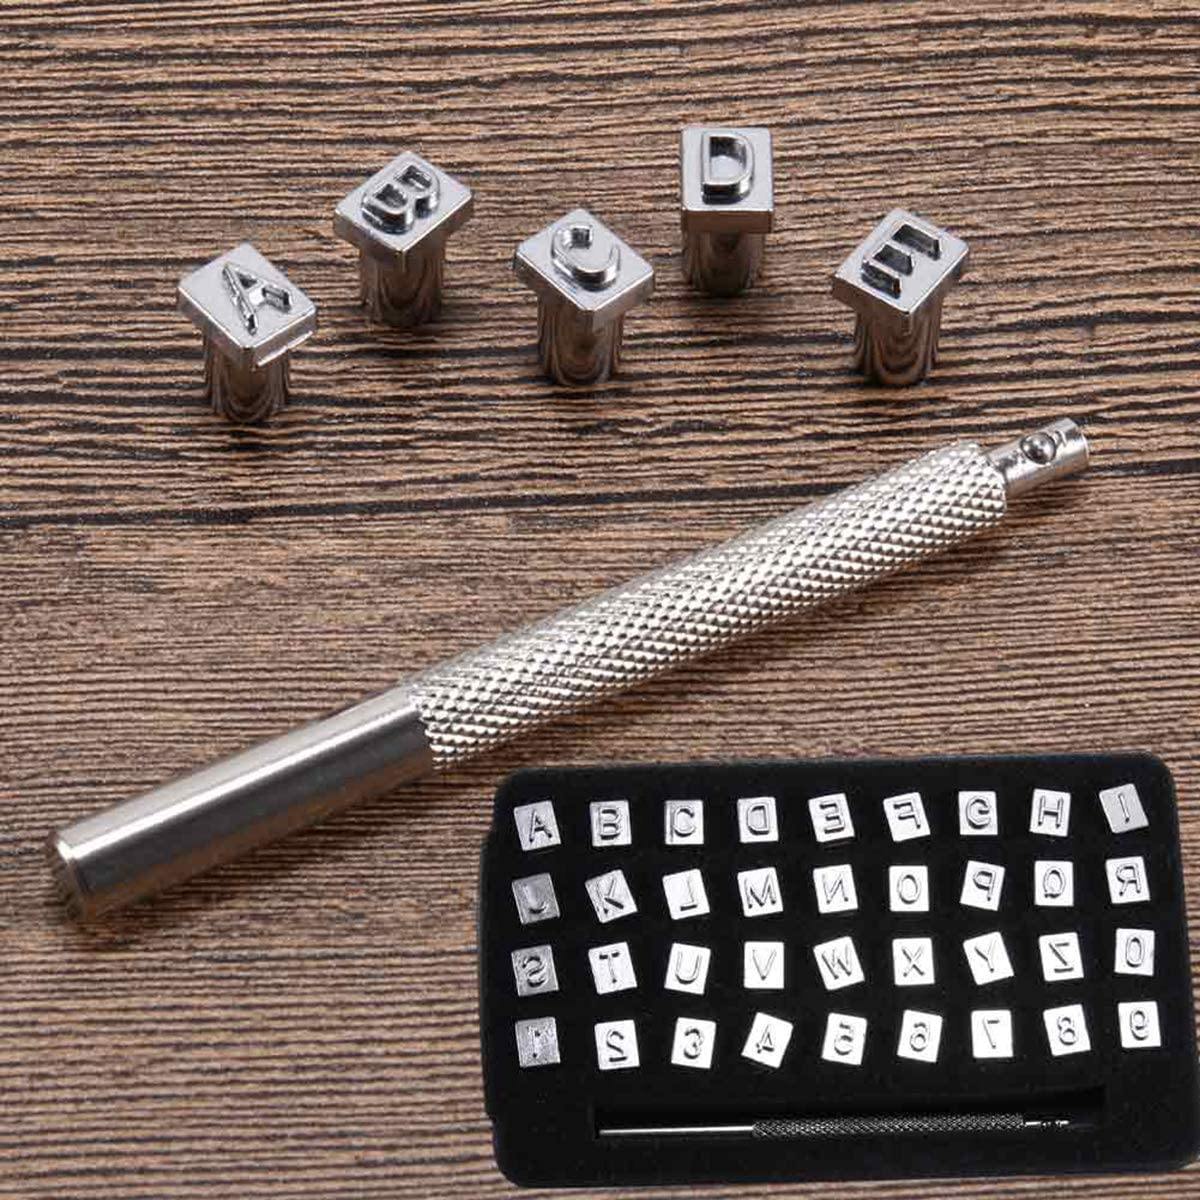 36Pcs Metal Letter and Number Stamps Punch Set for Leather Craft Stamps  Tools Art Steel Punch Metal Leather Punching Tools A-Z Alphabet Letters 0-9